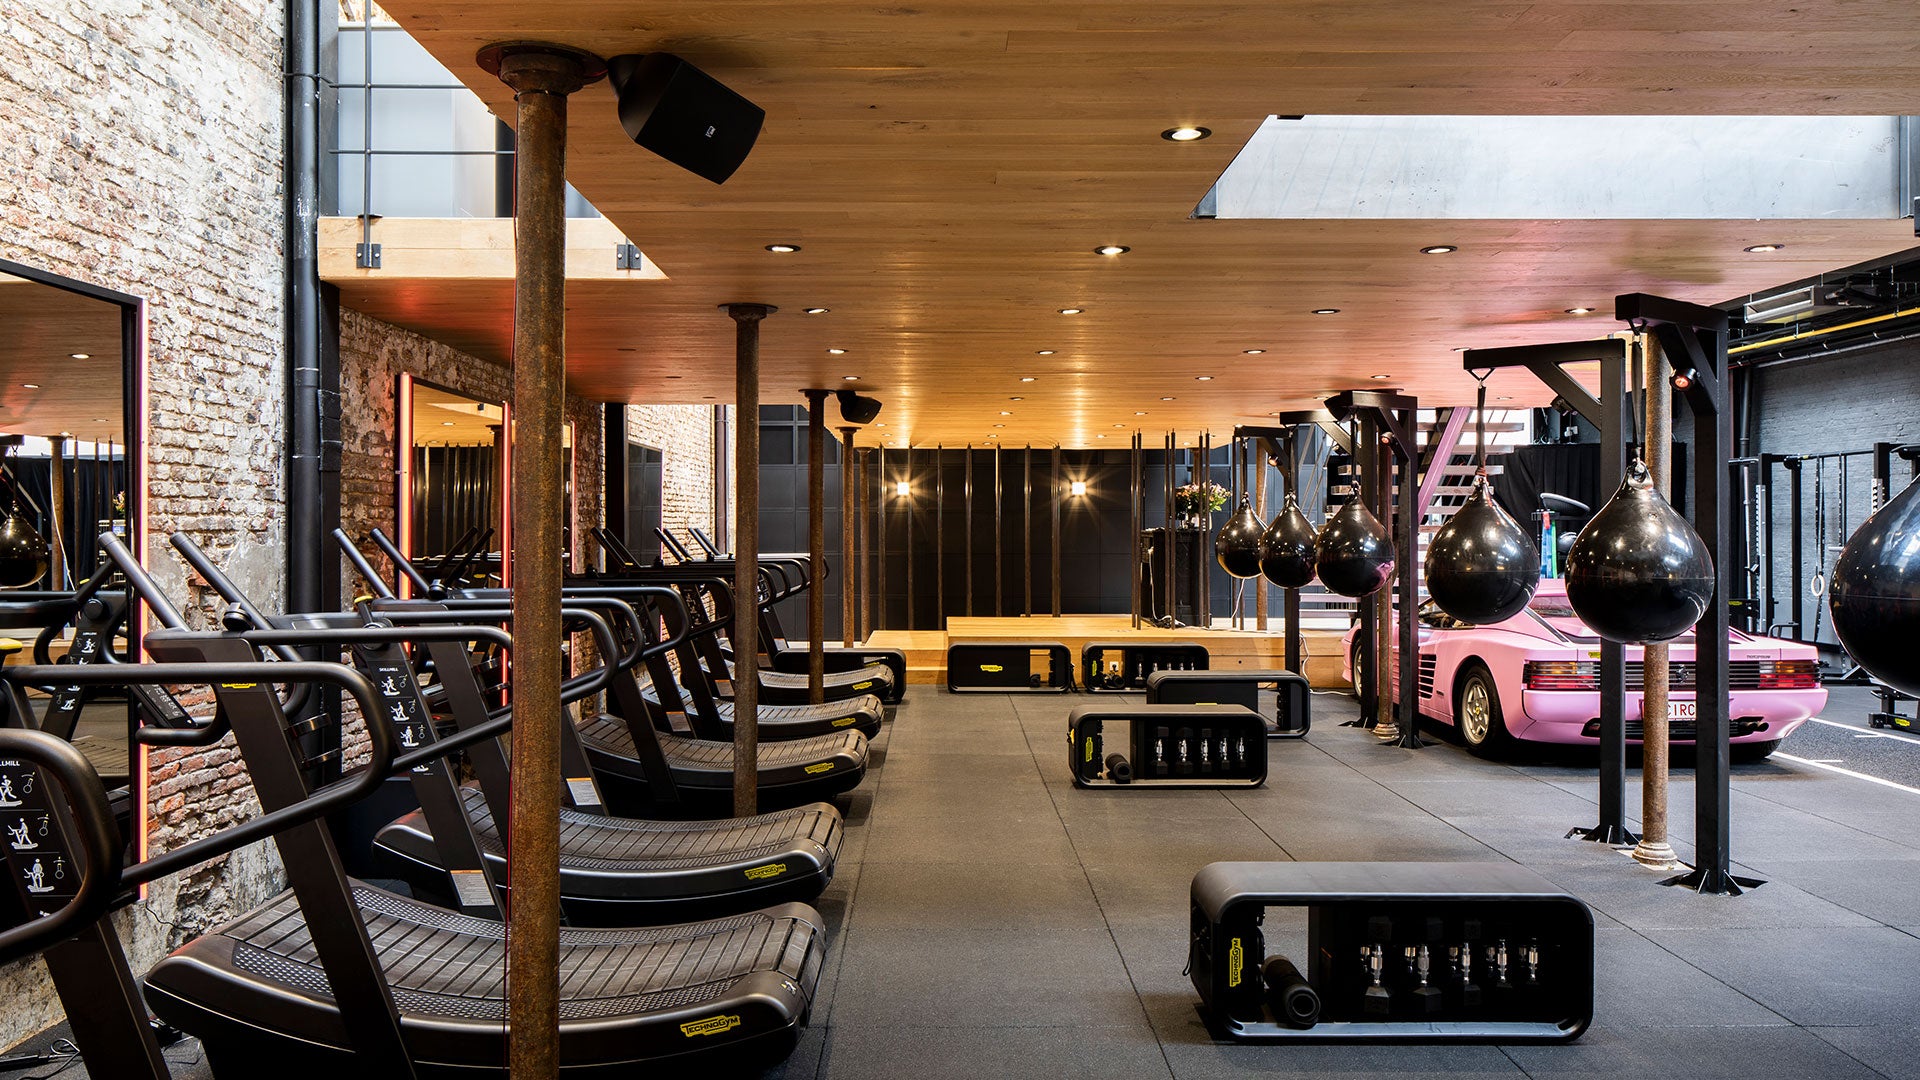 Technogym History how they became the Premium Gym Equipment Supplier